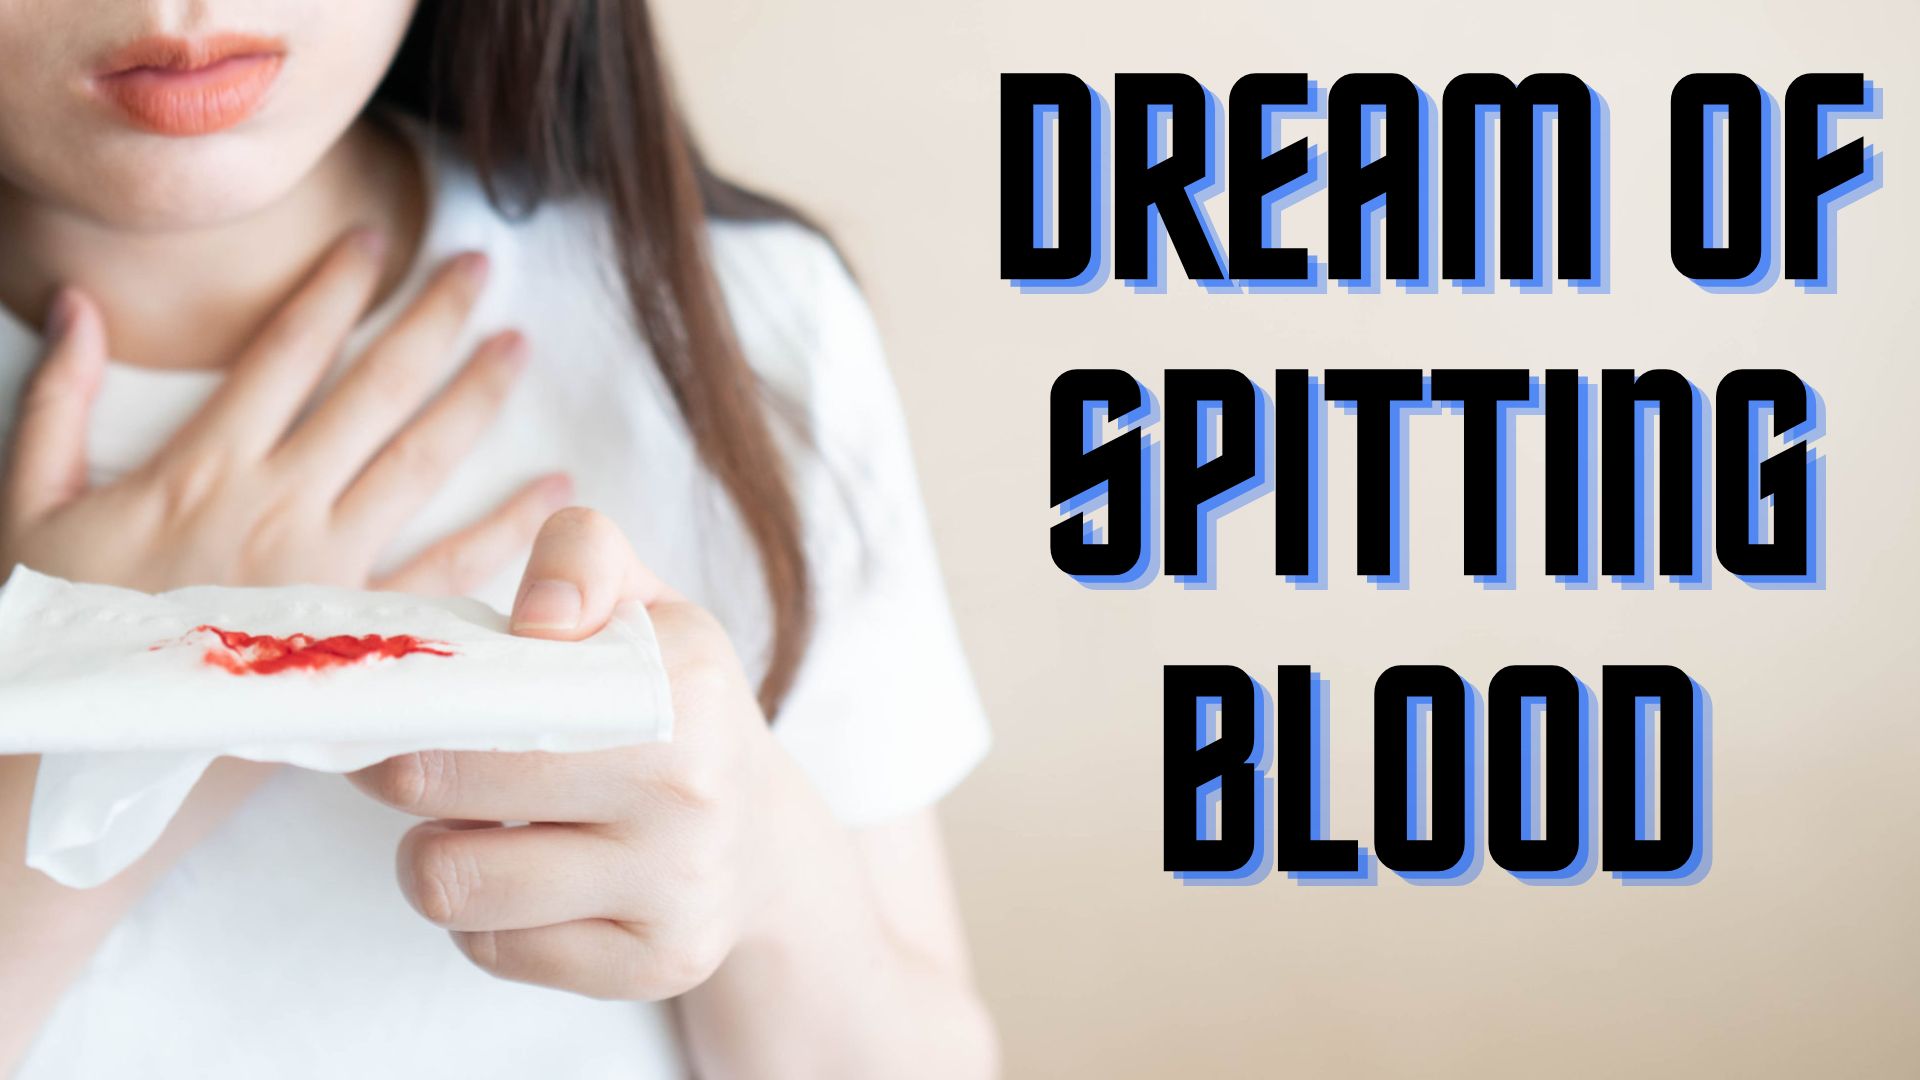 What Is The Meaning Of Dreaming Of Spitting Blood?